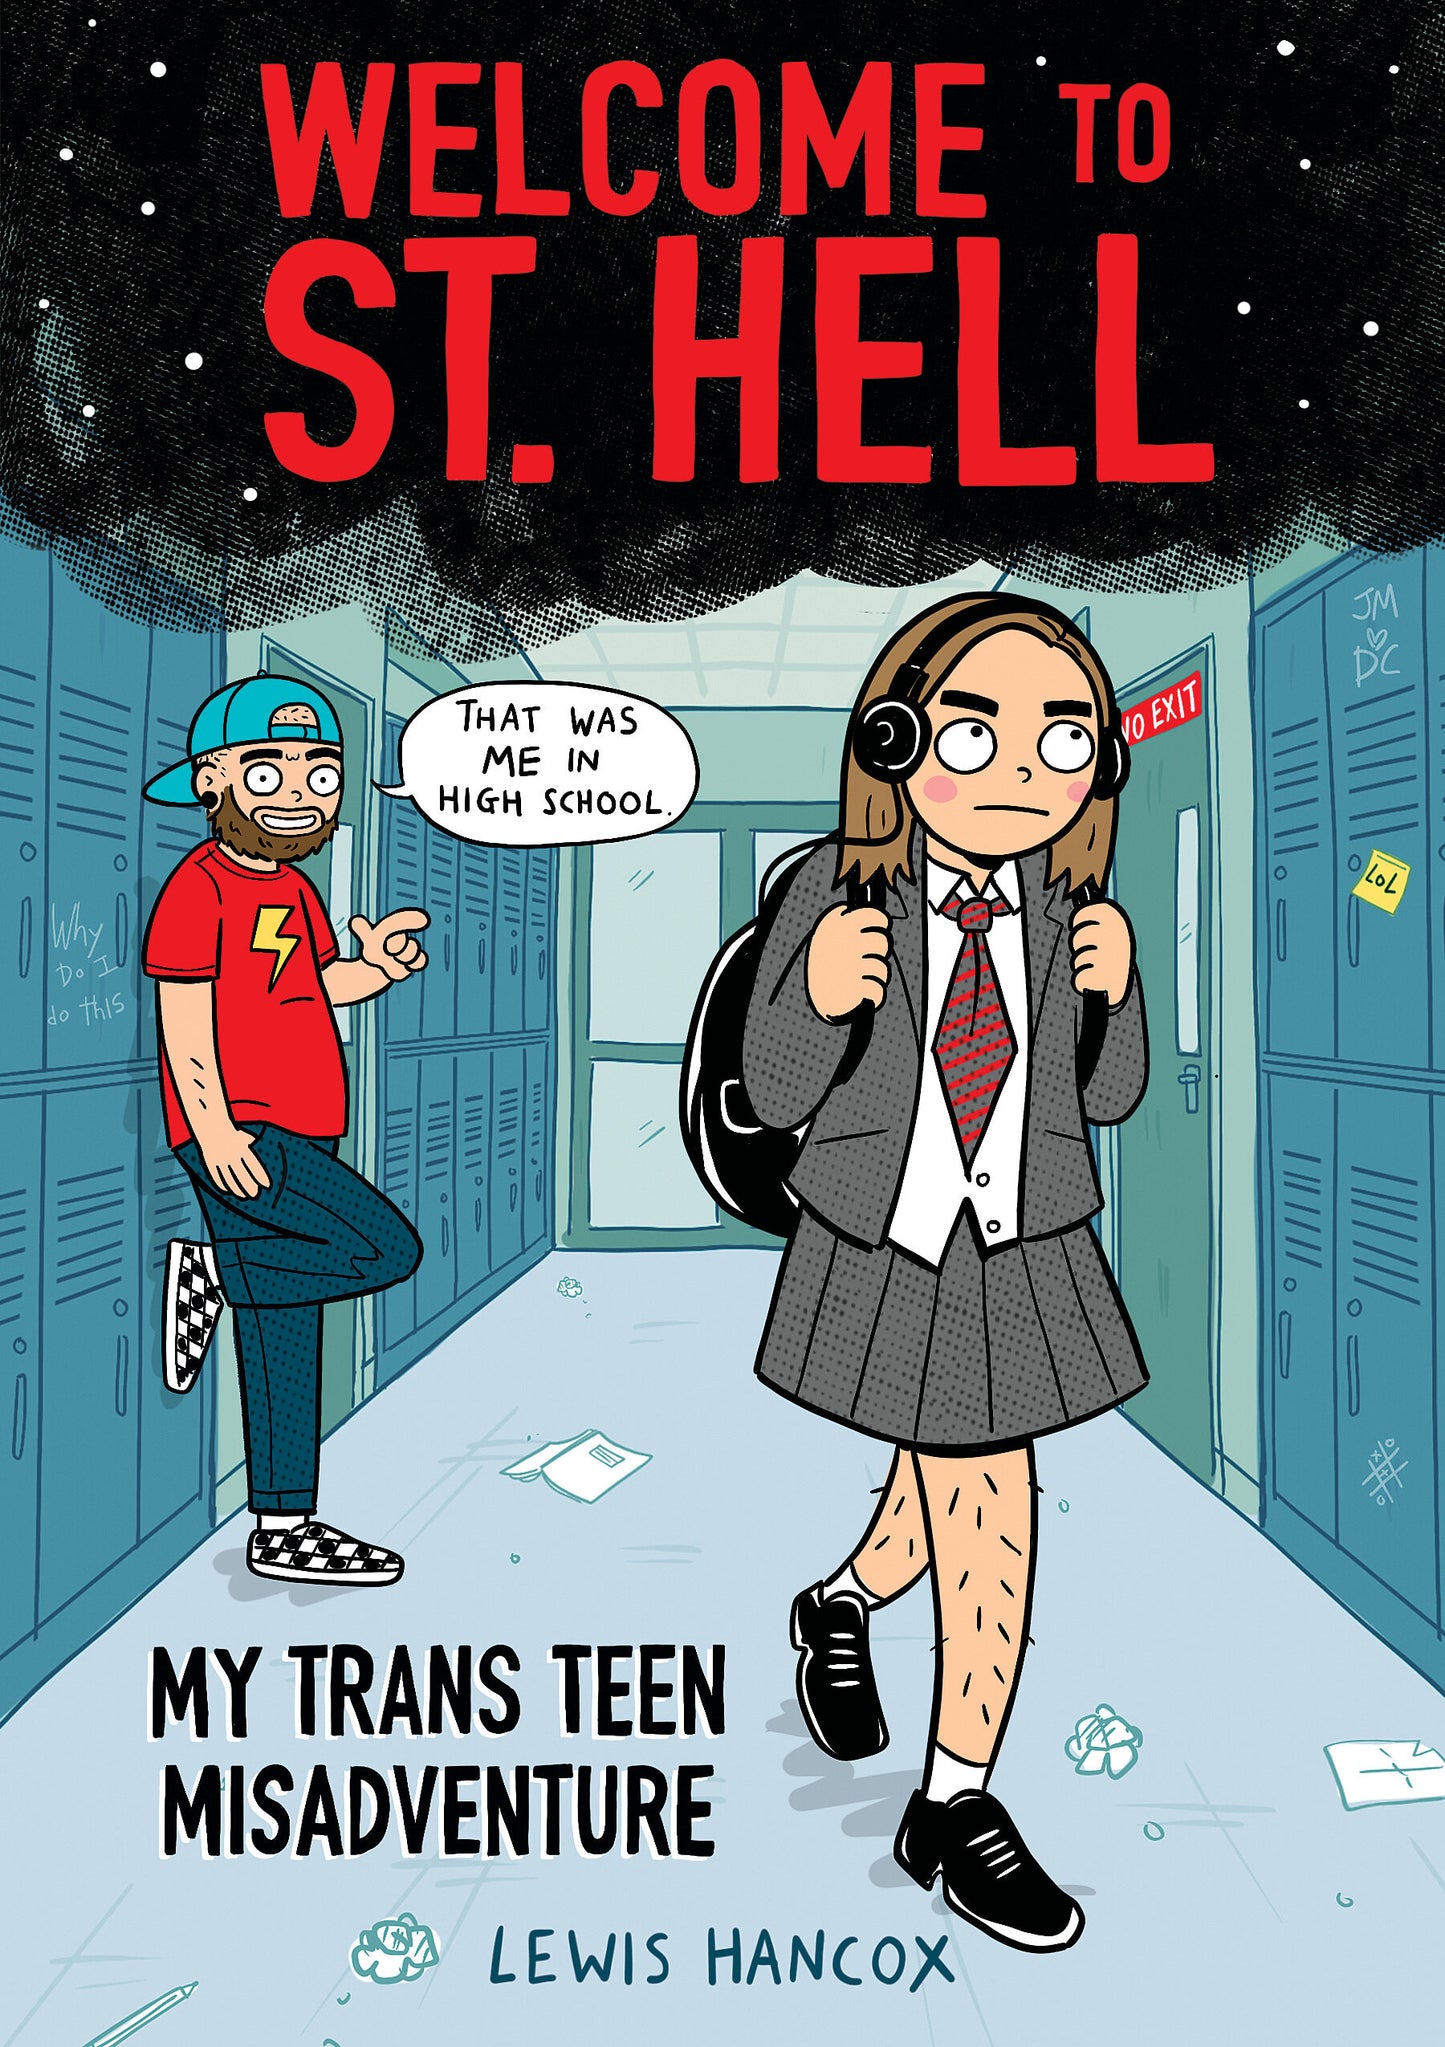 Welcome to St. Hell: My Trans Teen Misadventure